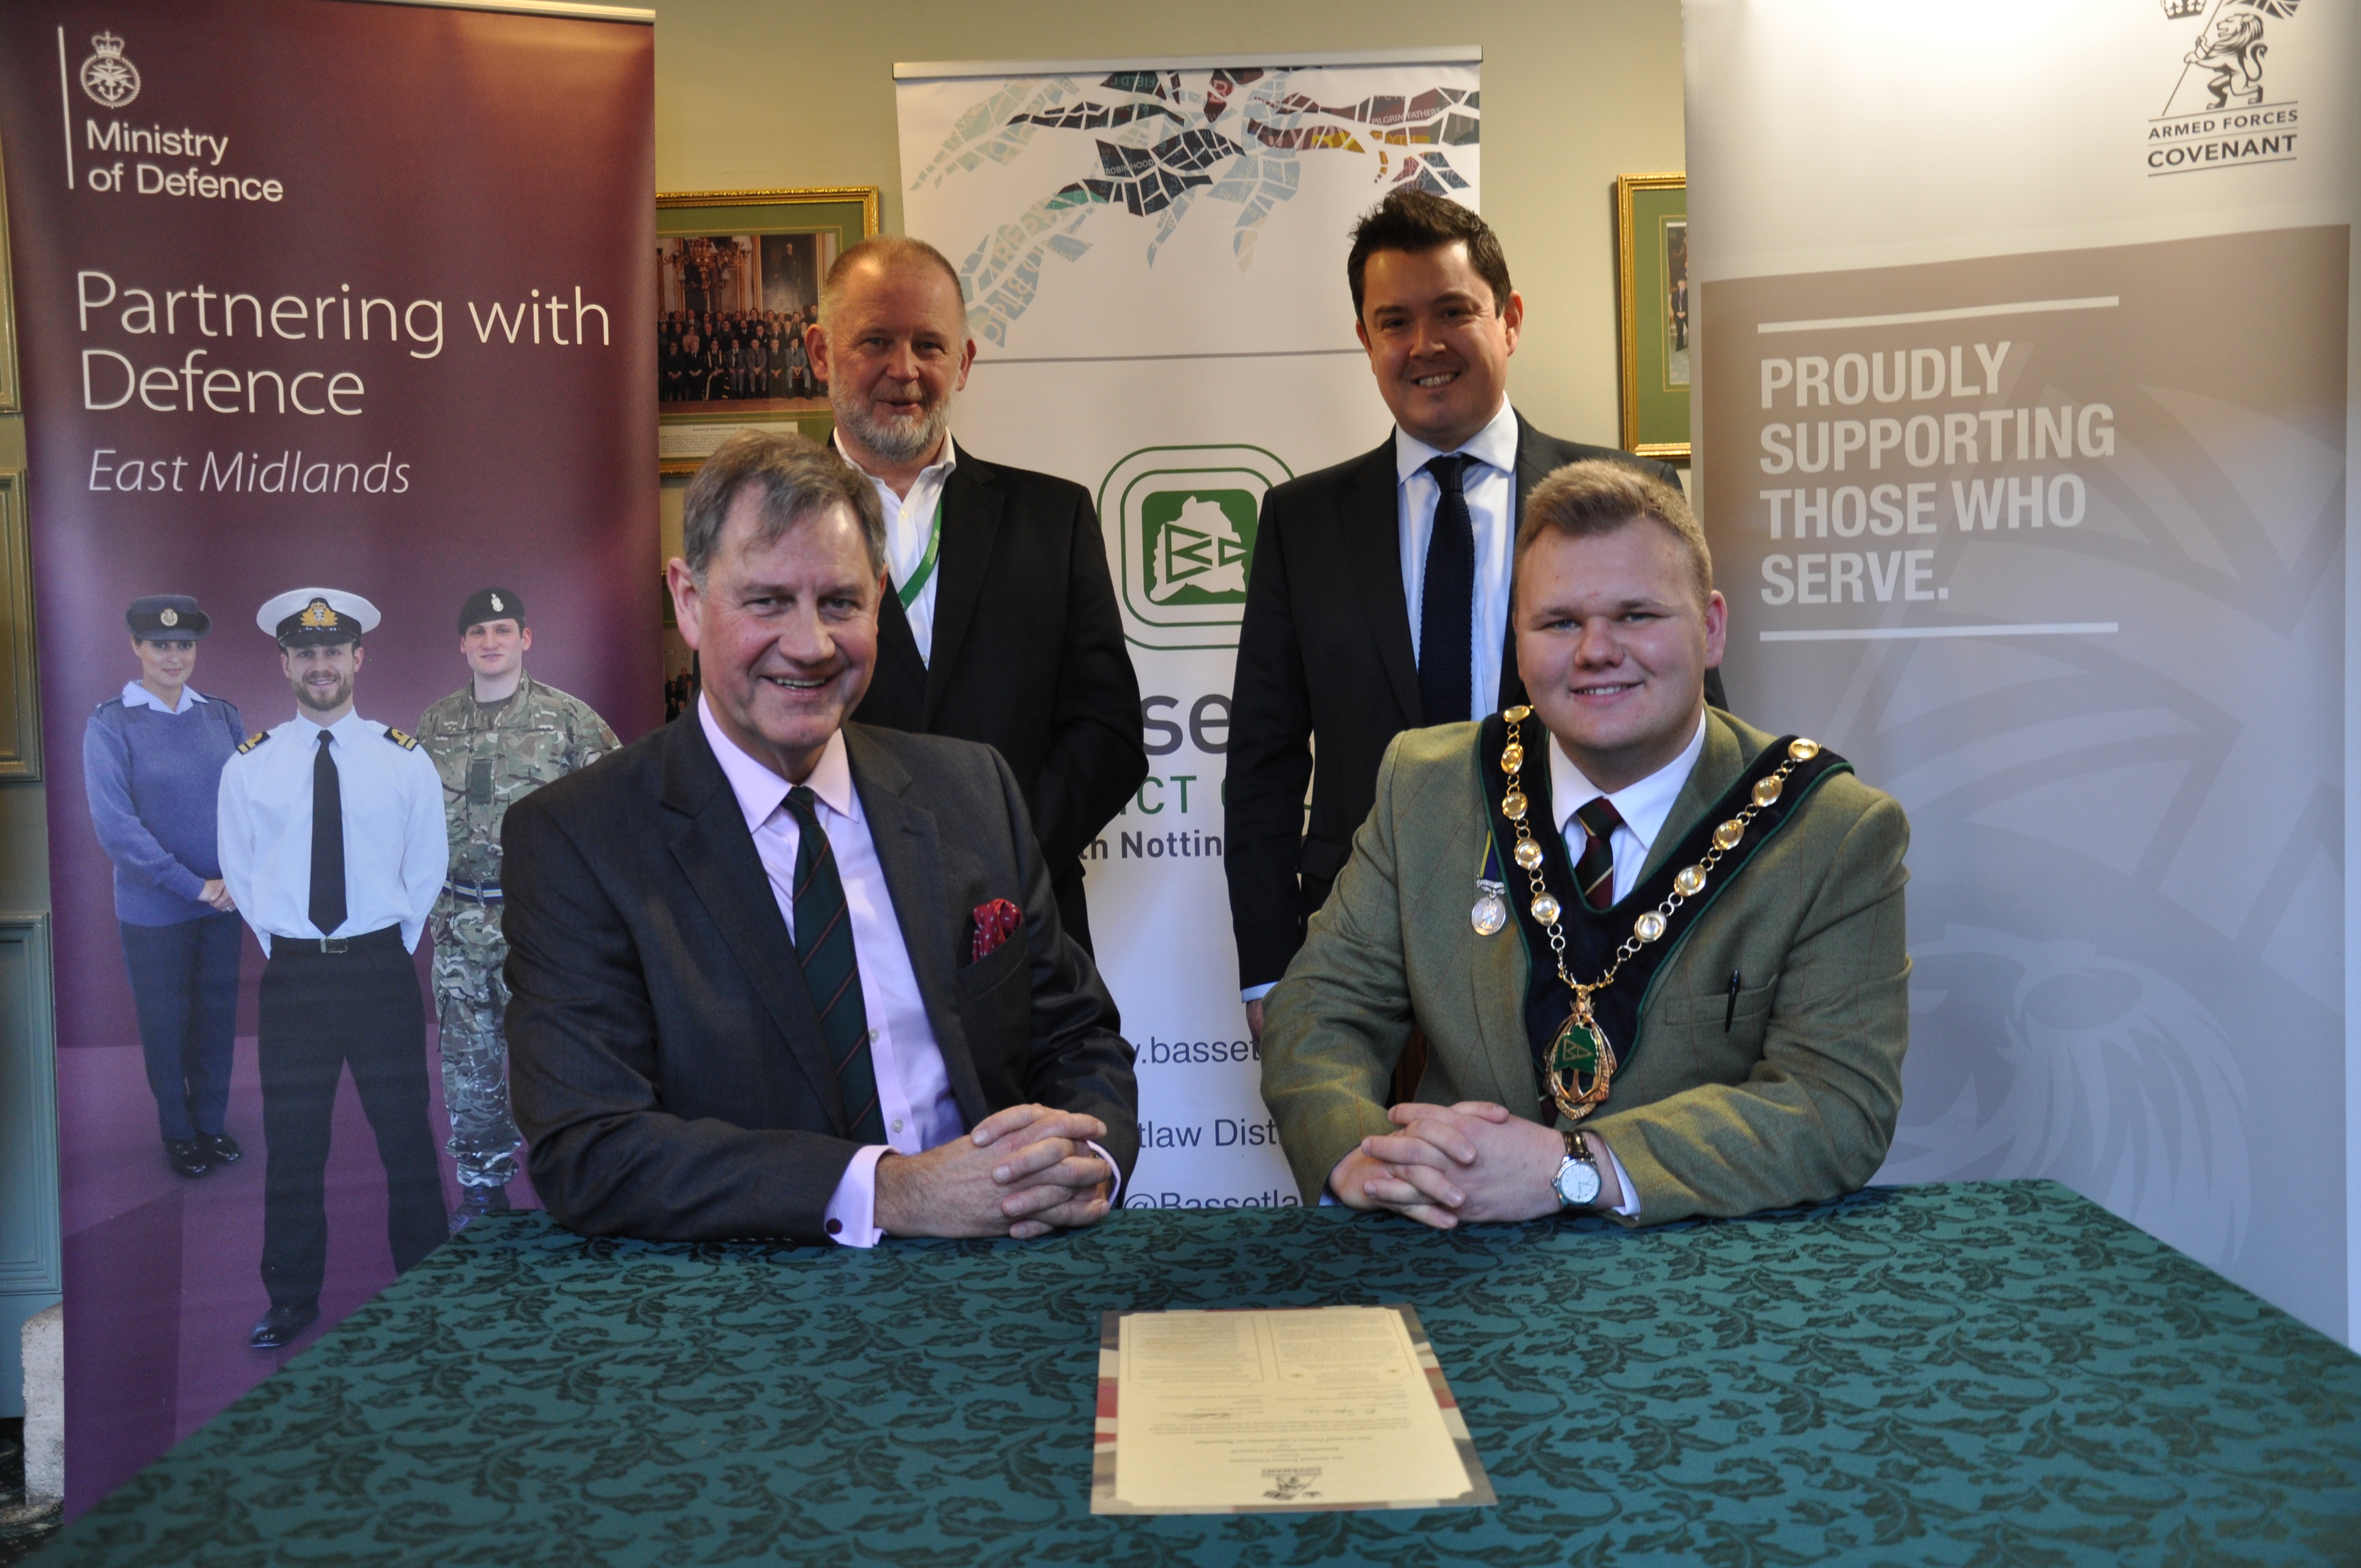 Council Pledges Support to Armed Forces